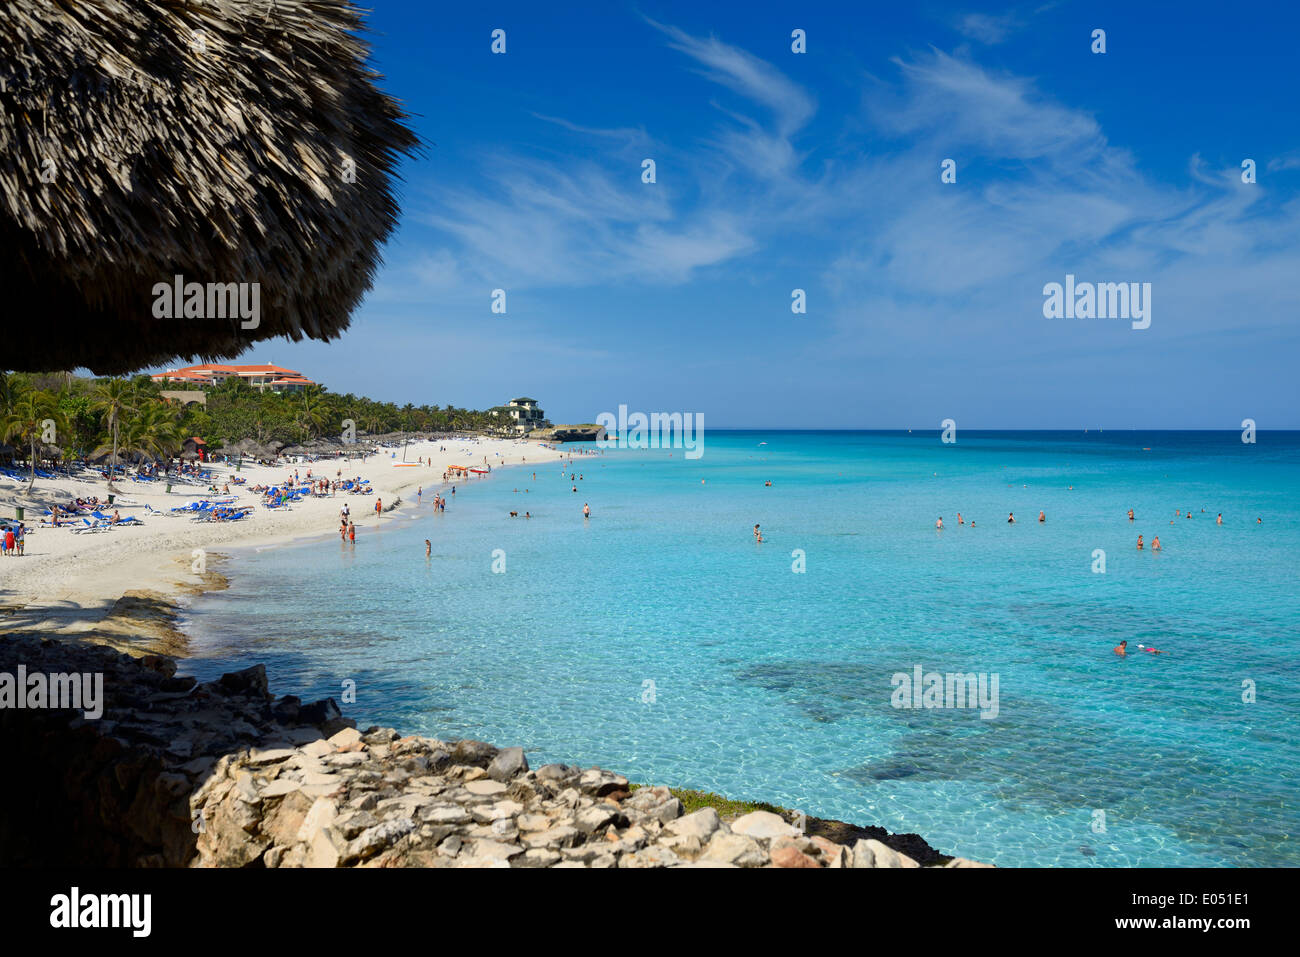 Tourists sunbathing and swimming at white sand beach and turquoise water of the Atlantic ocean of resort at Varadero Cuba Stock Photo